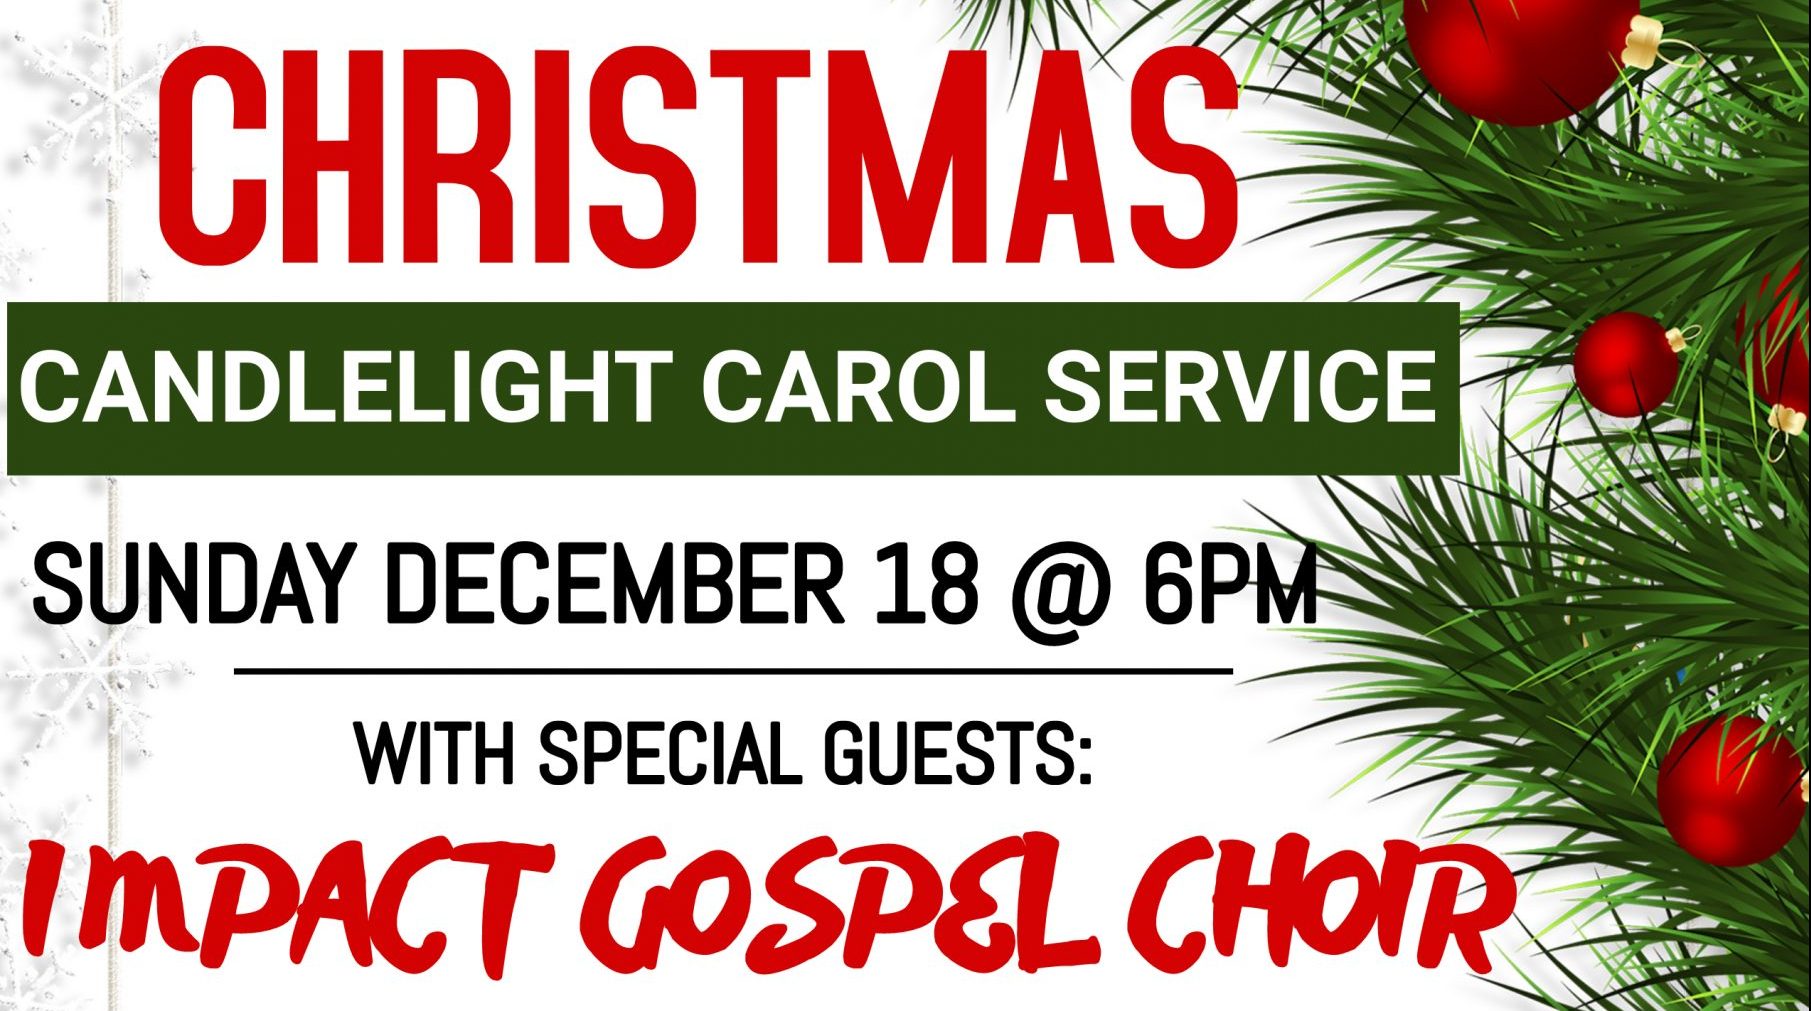 Candlelight Carol Service. Sunday 18th December @ 6pm. With special guests Impact Gospel Choir. Favourite carols, real life stories, mince pies and refreshments from 5.30pm at Cafe 3:16